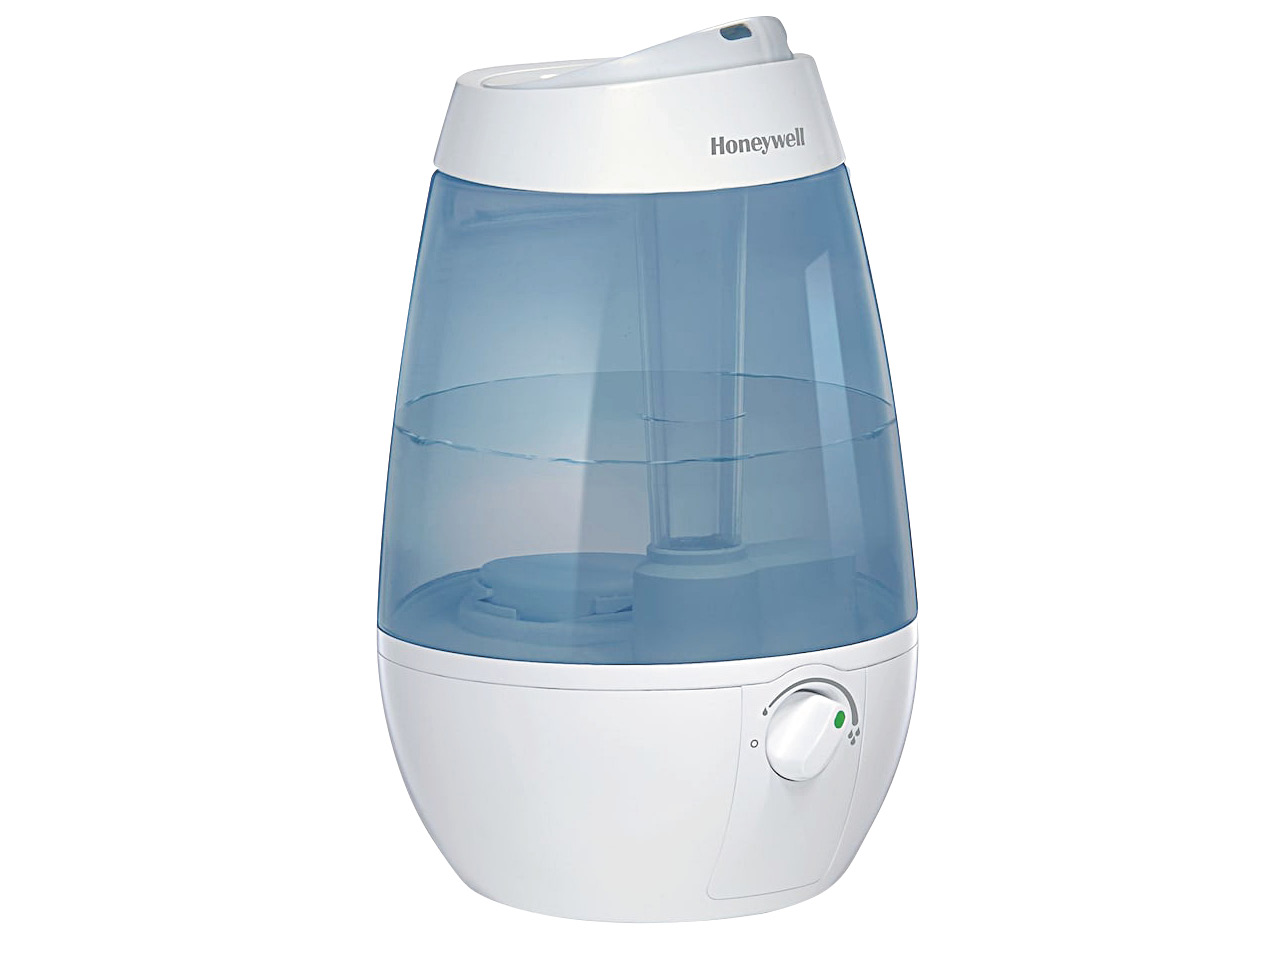 White Honeywell humidifier with blue tank shown on a white background.